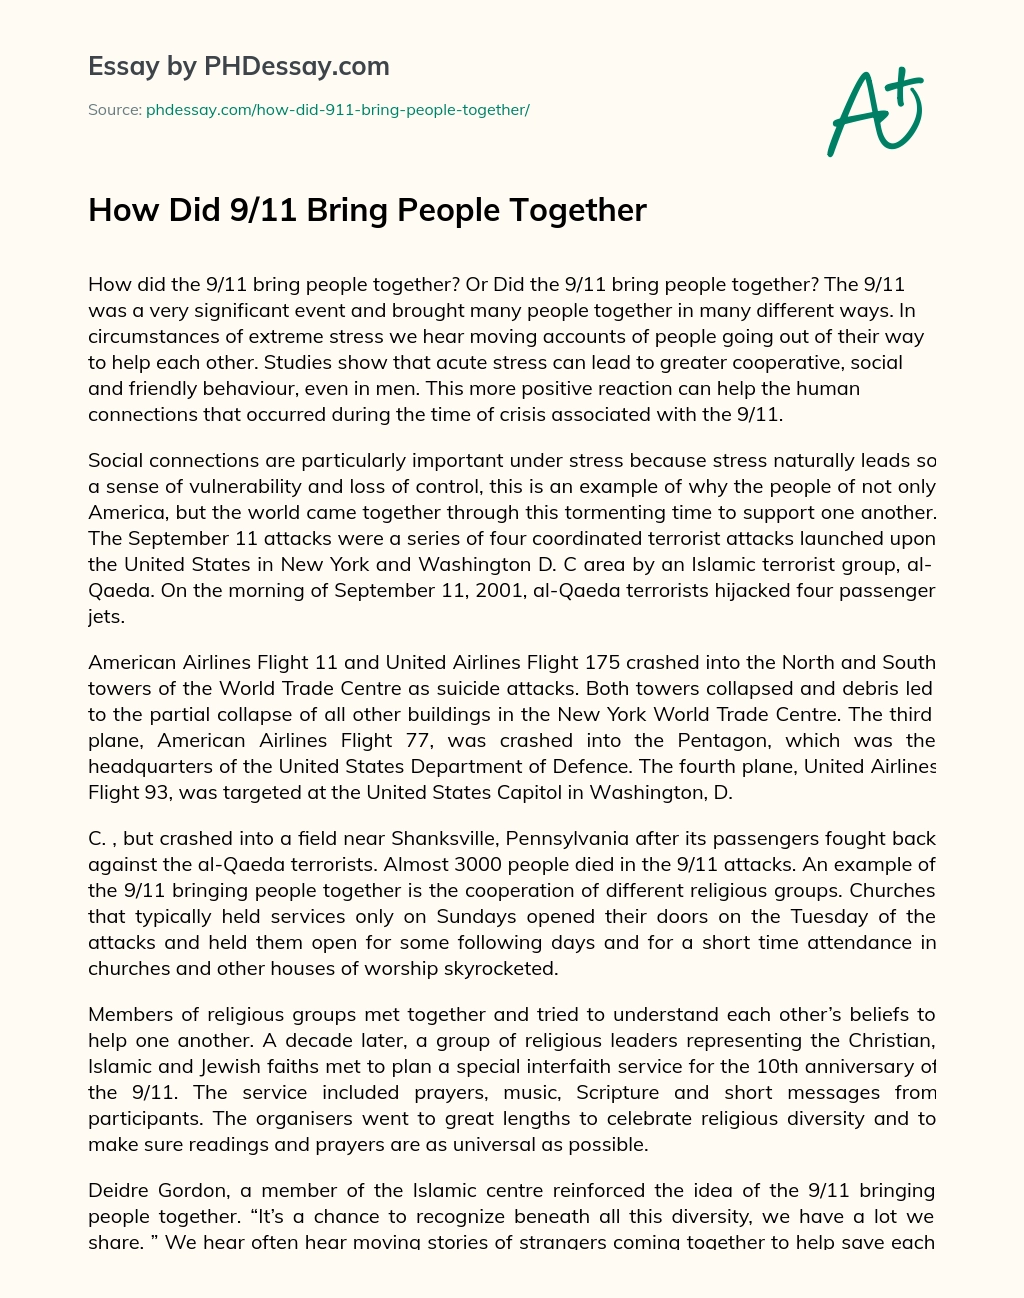 How Did 9/11 Bring People Together essay